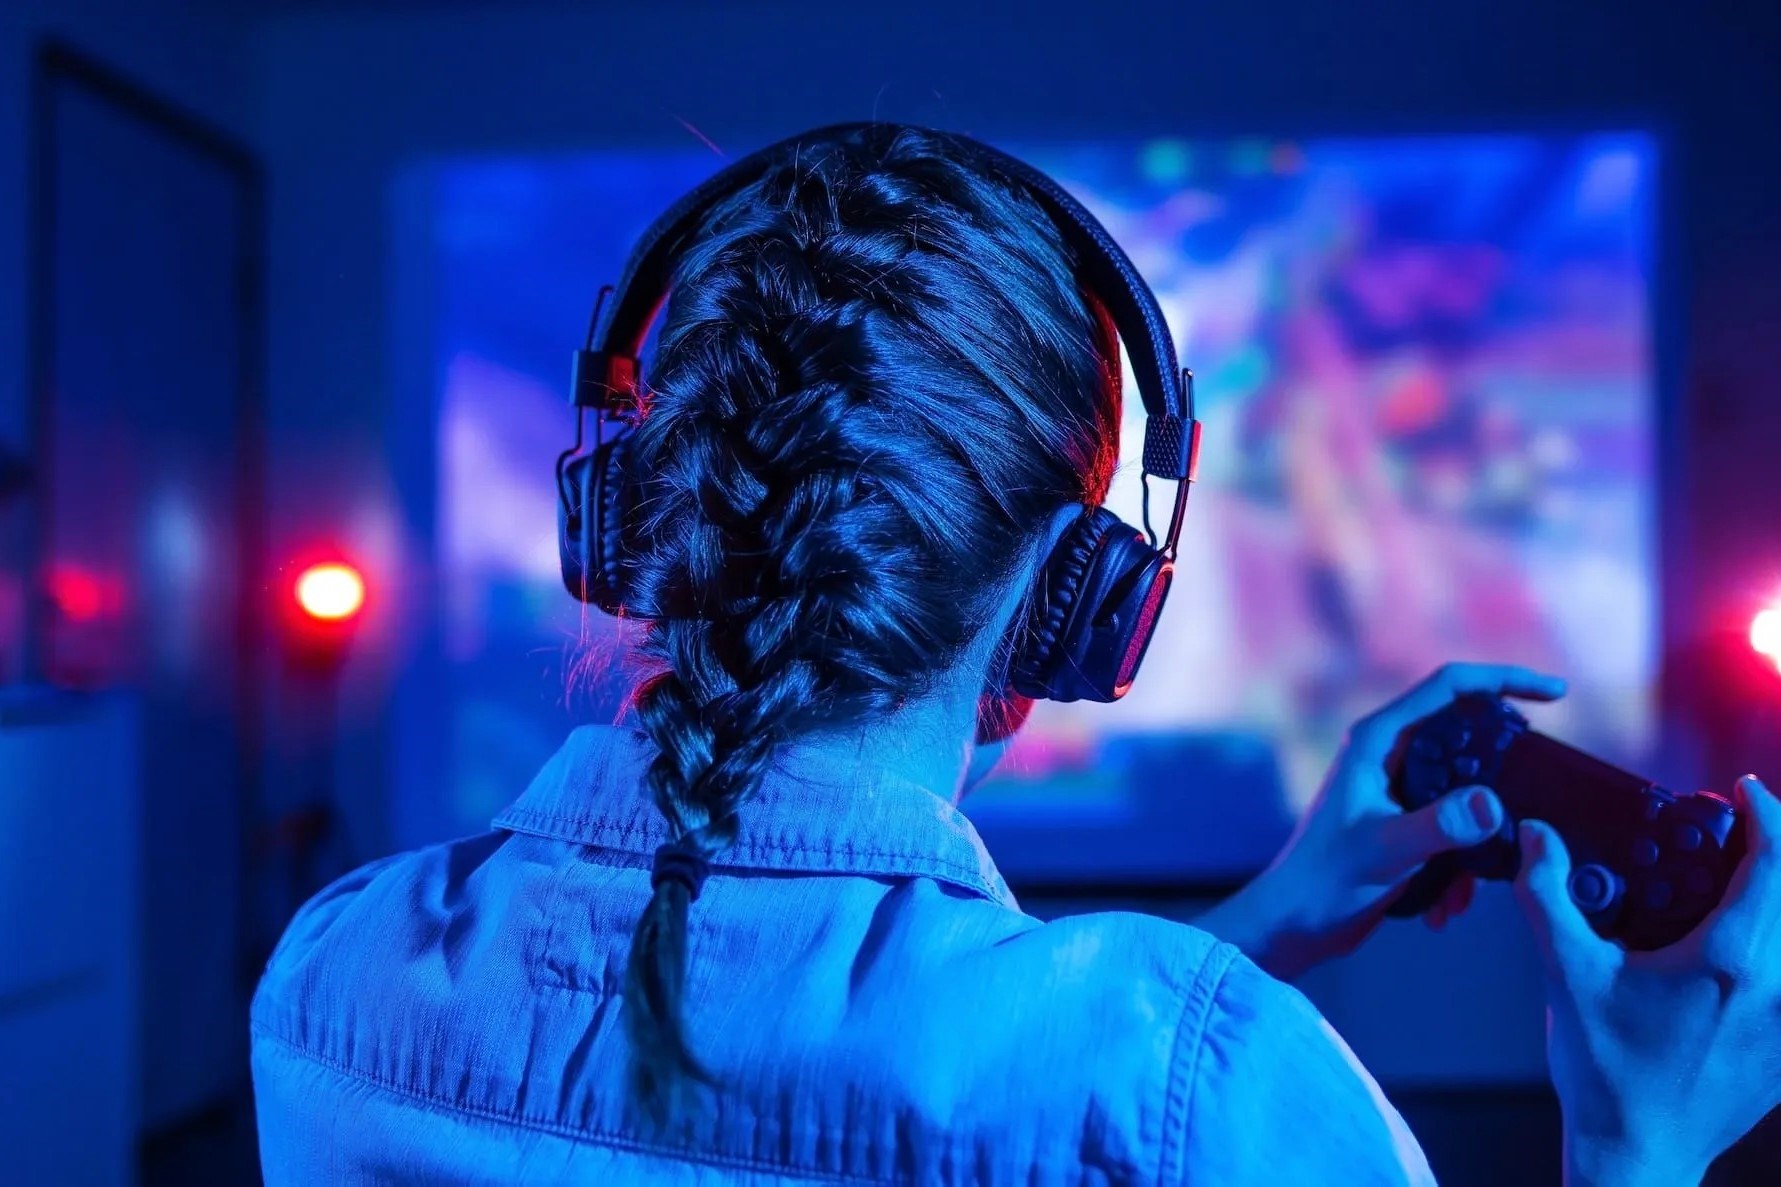 The Most Popular Headsets Among Streamers